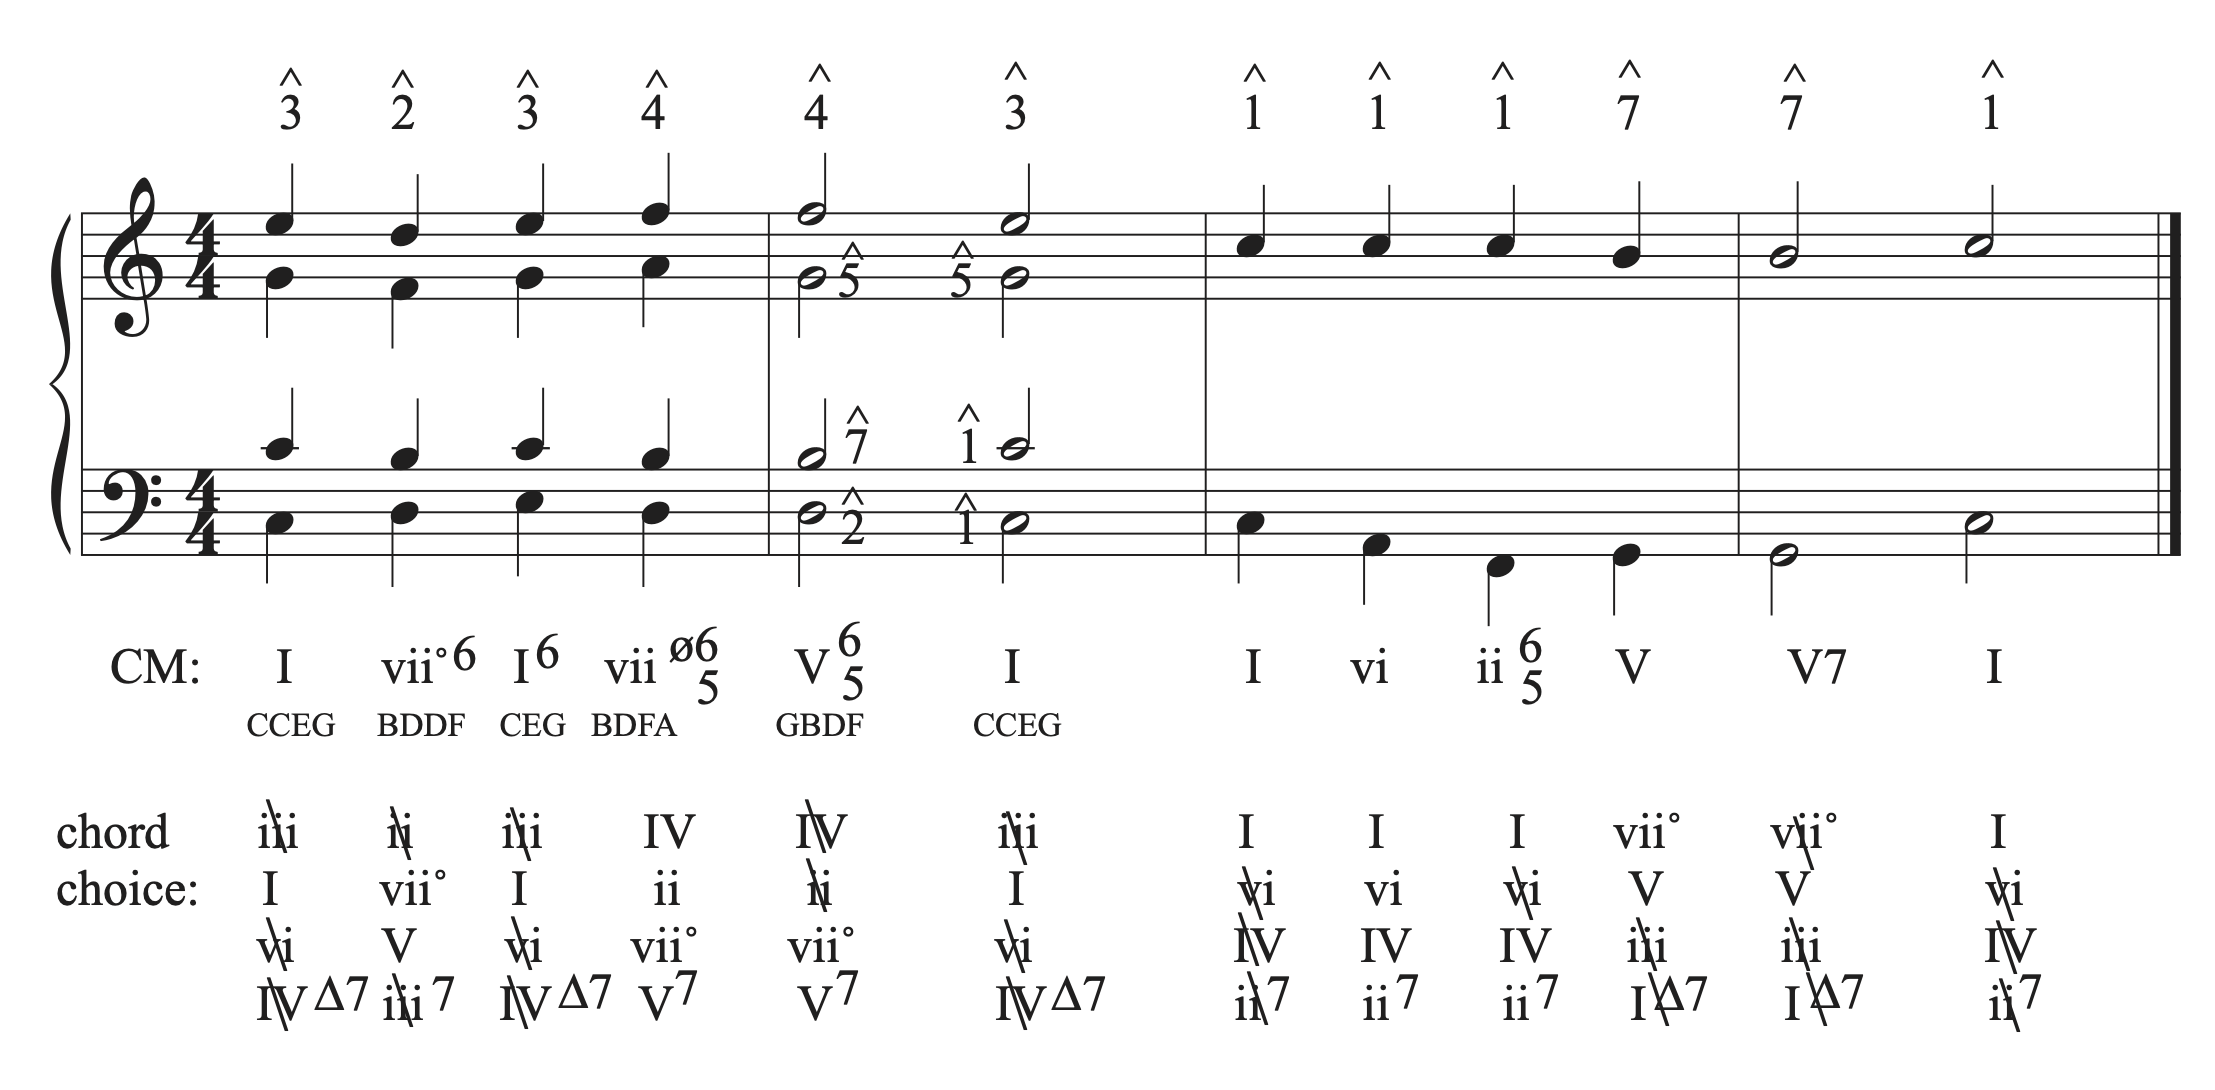 The musical example in C major with the alto and tenor added to bar 2.